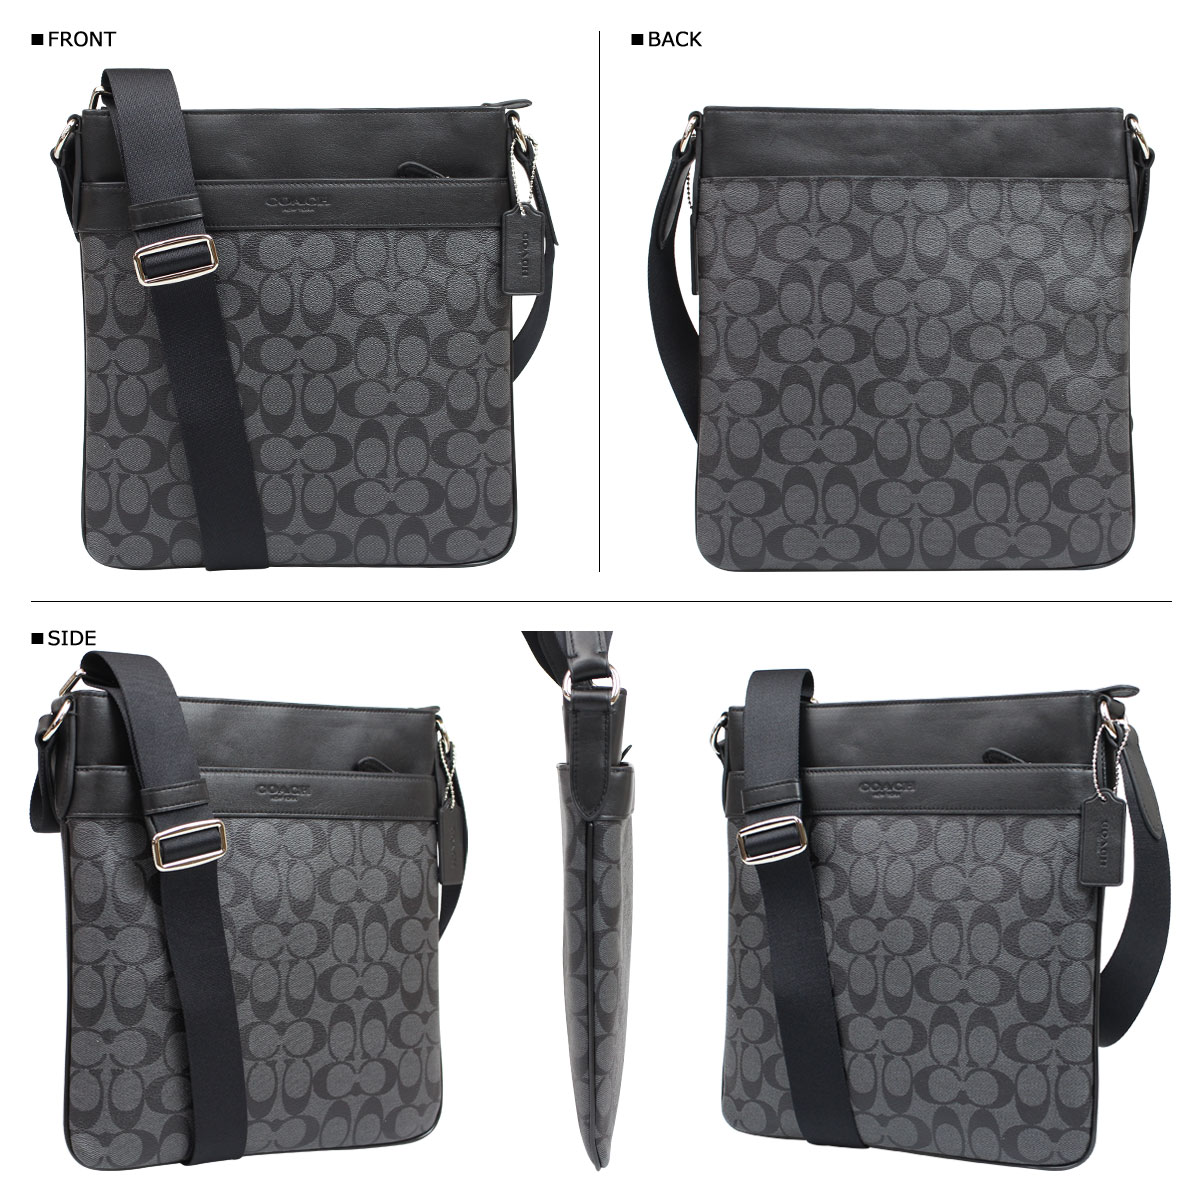 coach outlet online crossbody bags